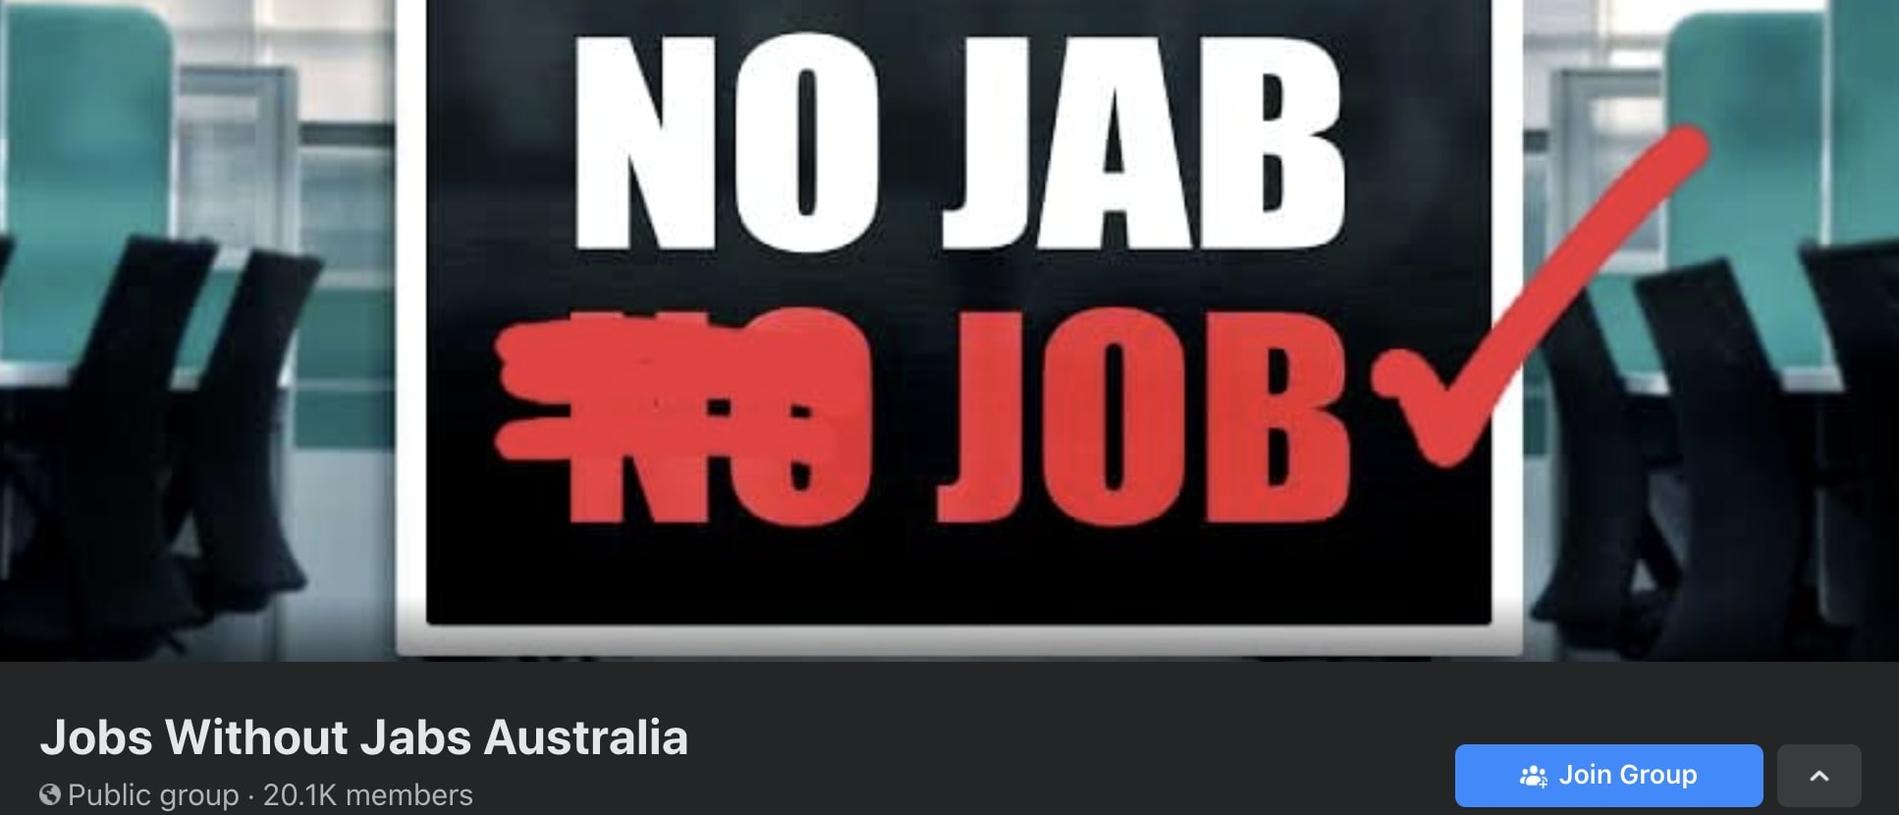 Thousands have gathered online to oppose mandatory vaccination in online groups for ‘no-jab’ employment.